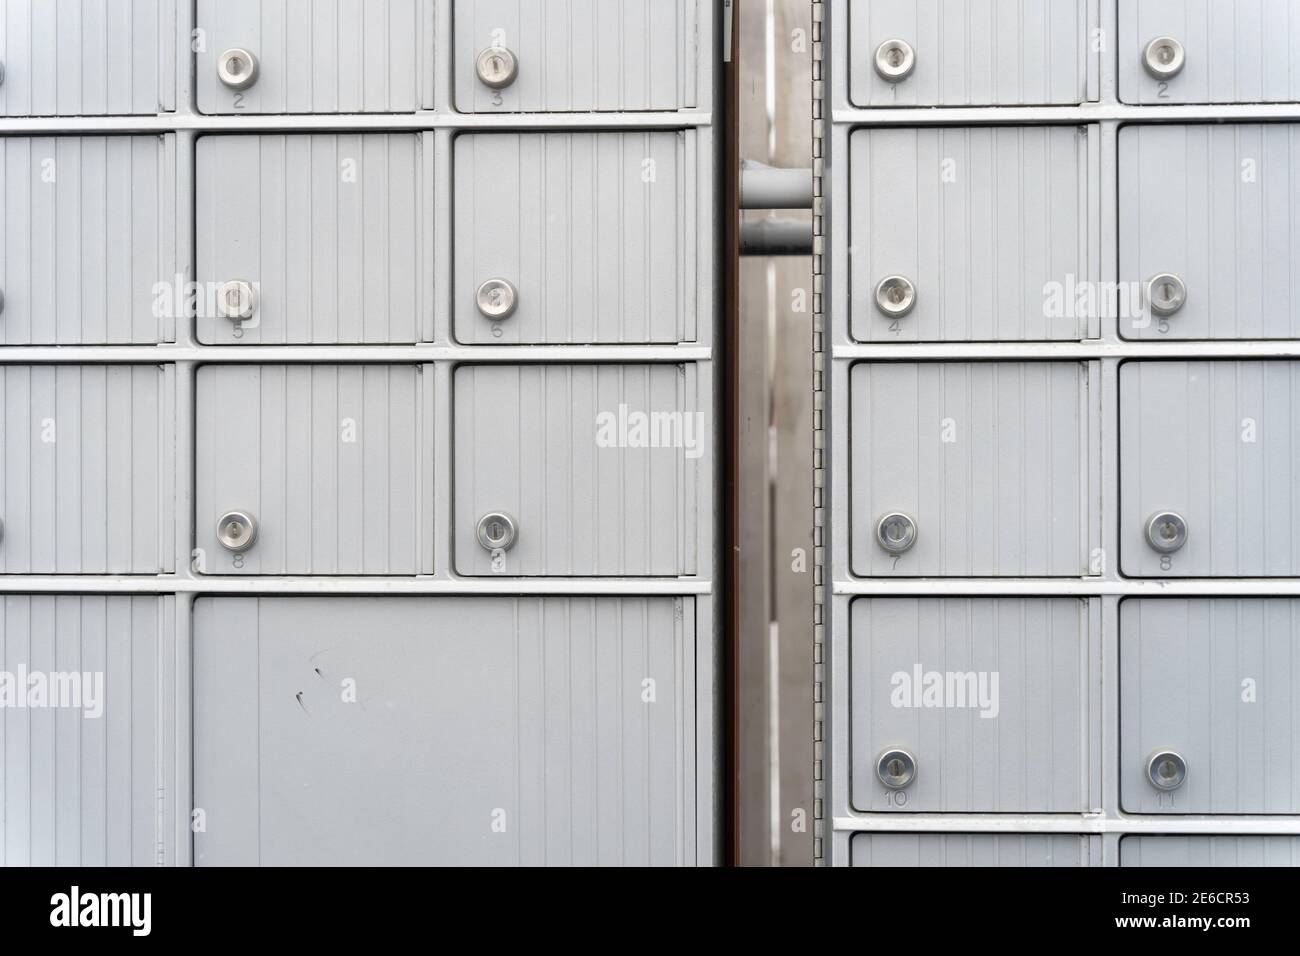 Residential developments Area postal boxes for mail and packages Stock Photo